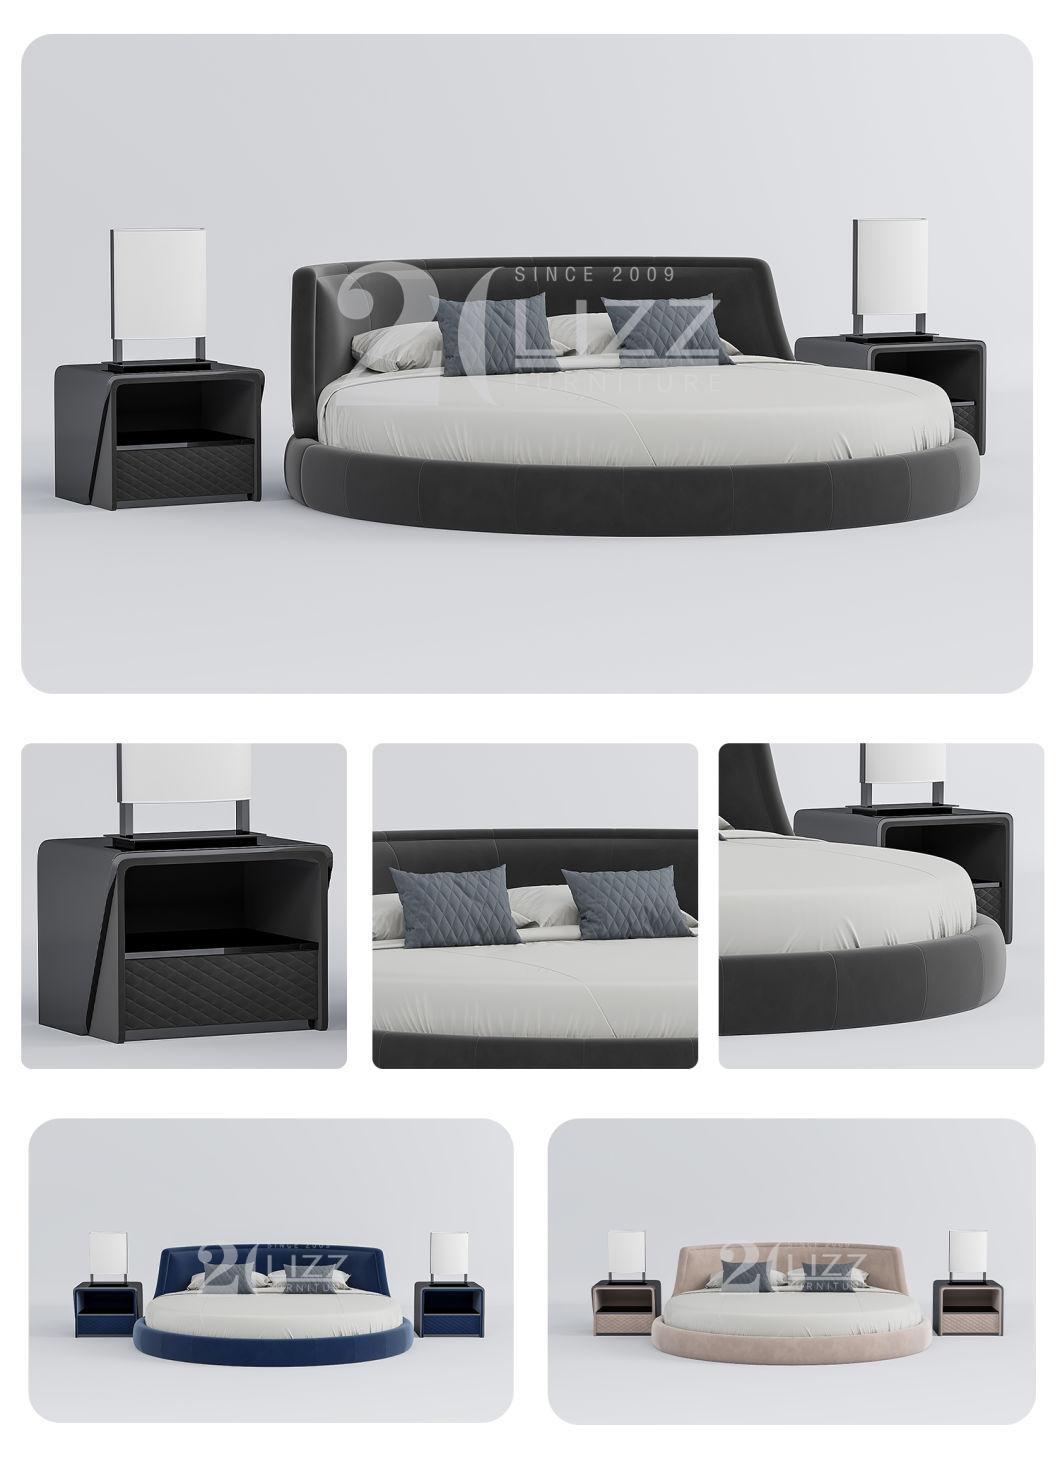 2022 Nordic New Design Double Size Bed Luxury Round Shape Wooded Home Apartment Room Furniture